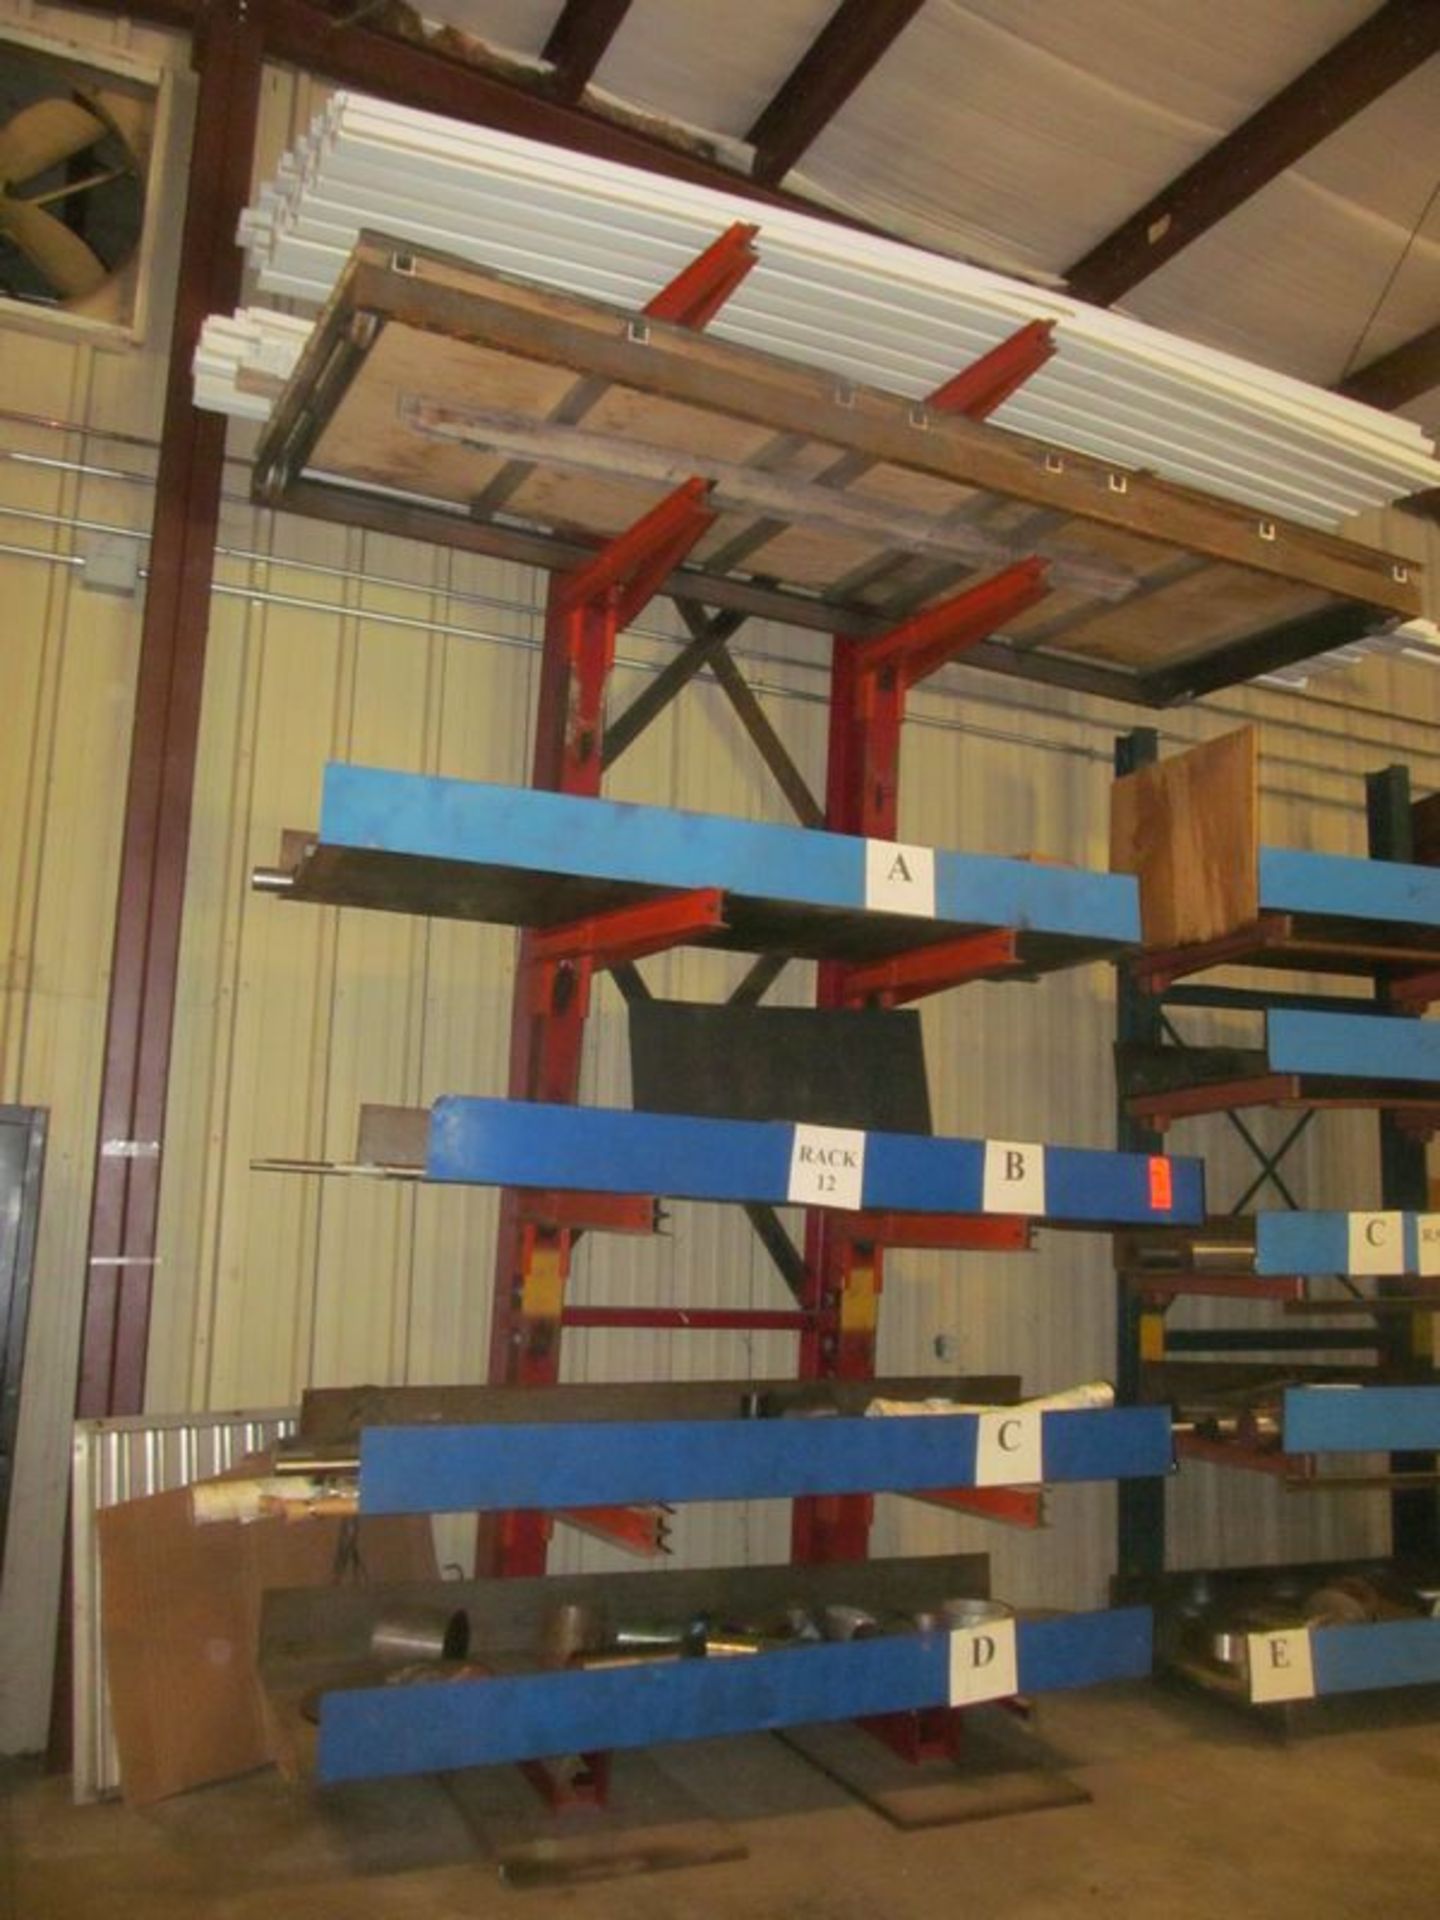 6 tier cantilevered metal stock rack, 48"w x 48" deep x 15' high with (10) 36" adjustable arms